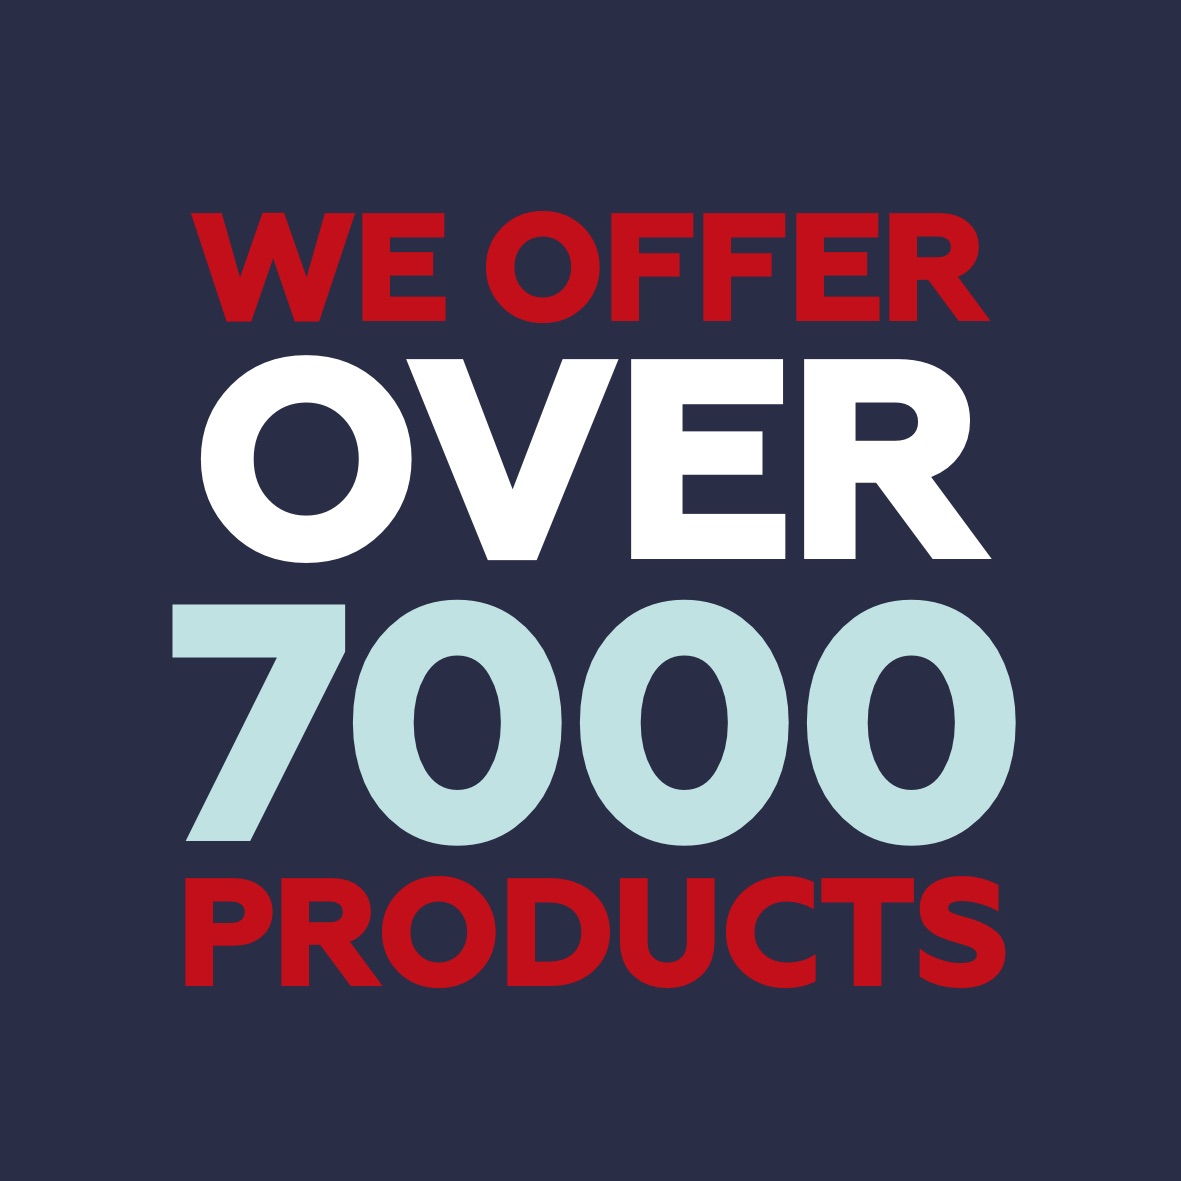 Over 7500 Products